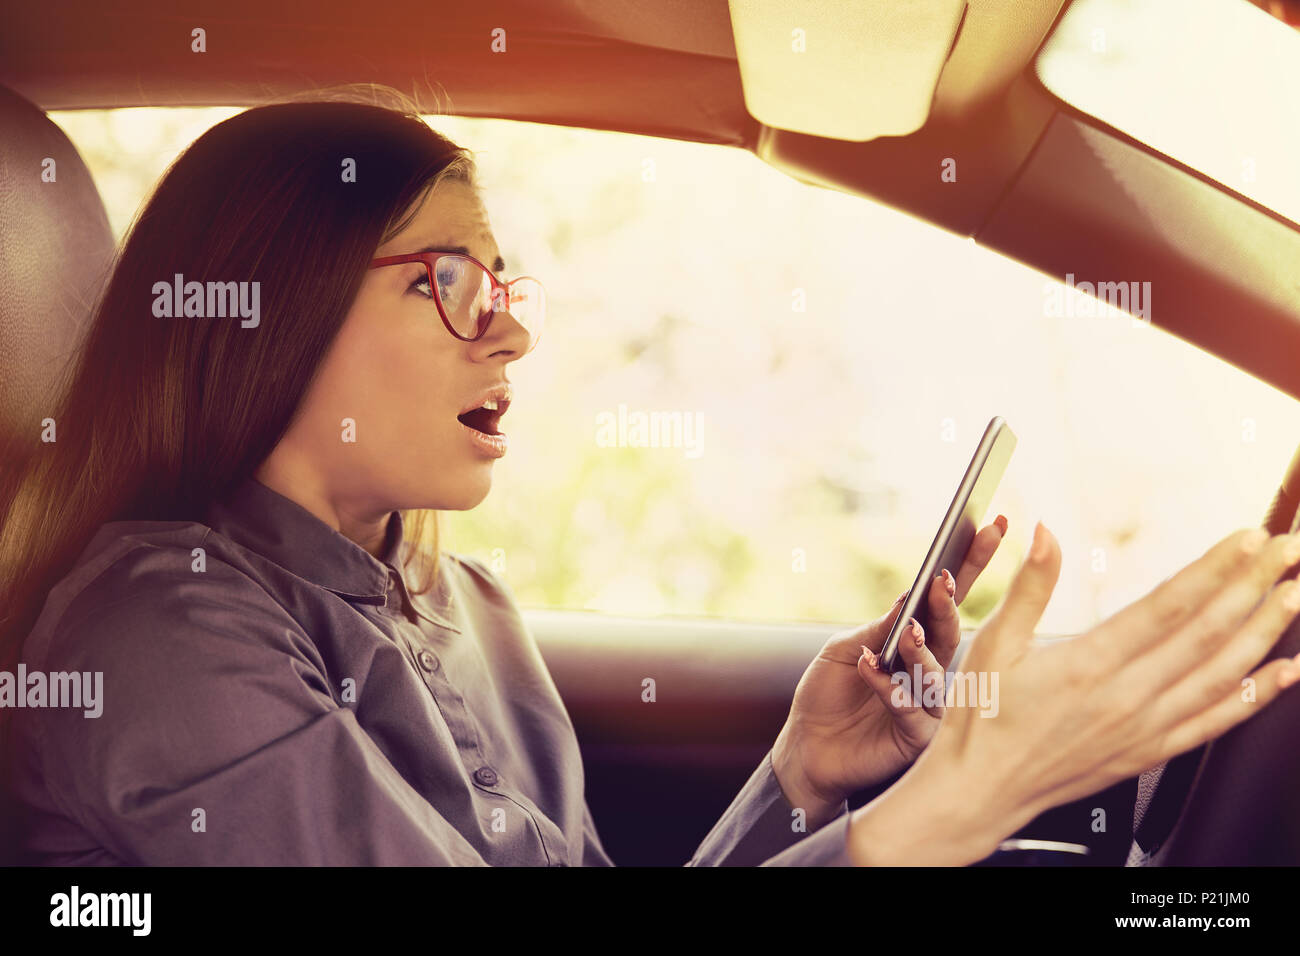 Shocked woman distracted by mobile phone texting while driving a car Stock Photo